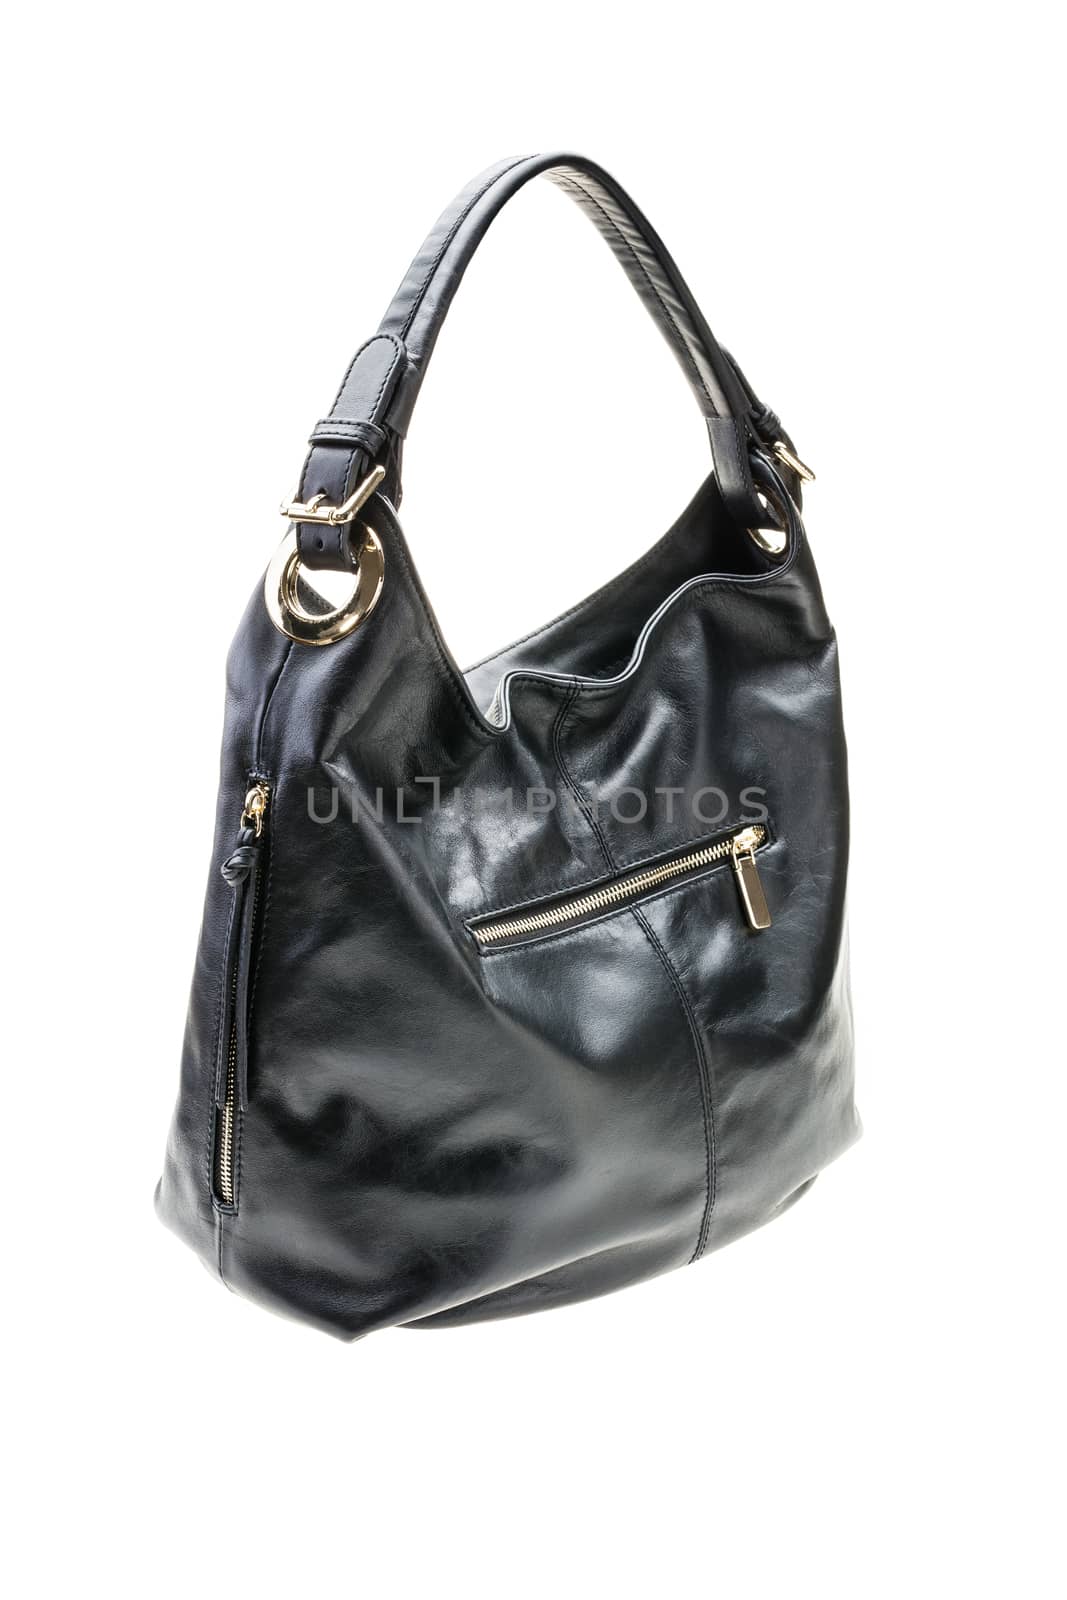 New black womens bag isolated on white background.